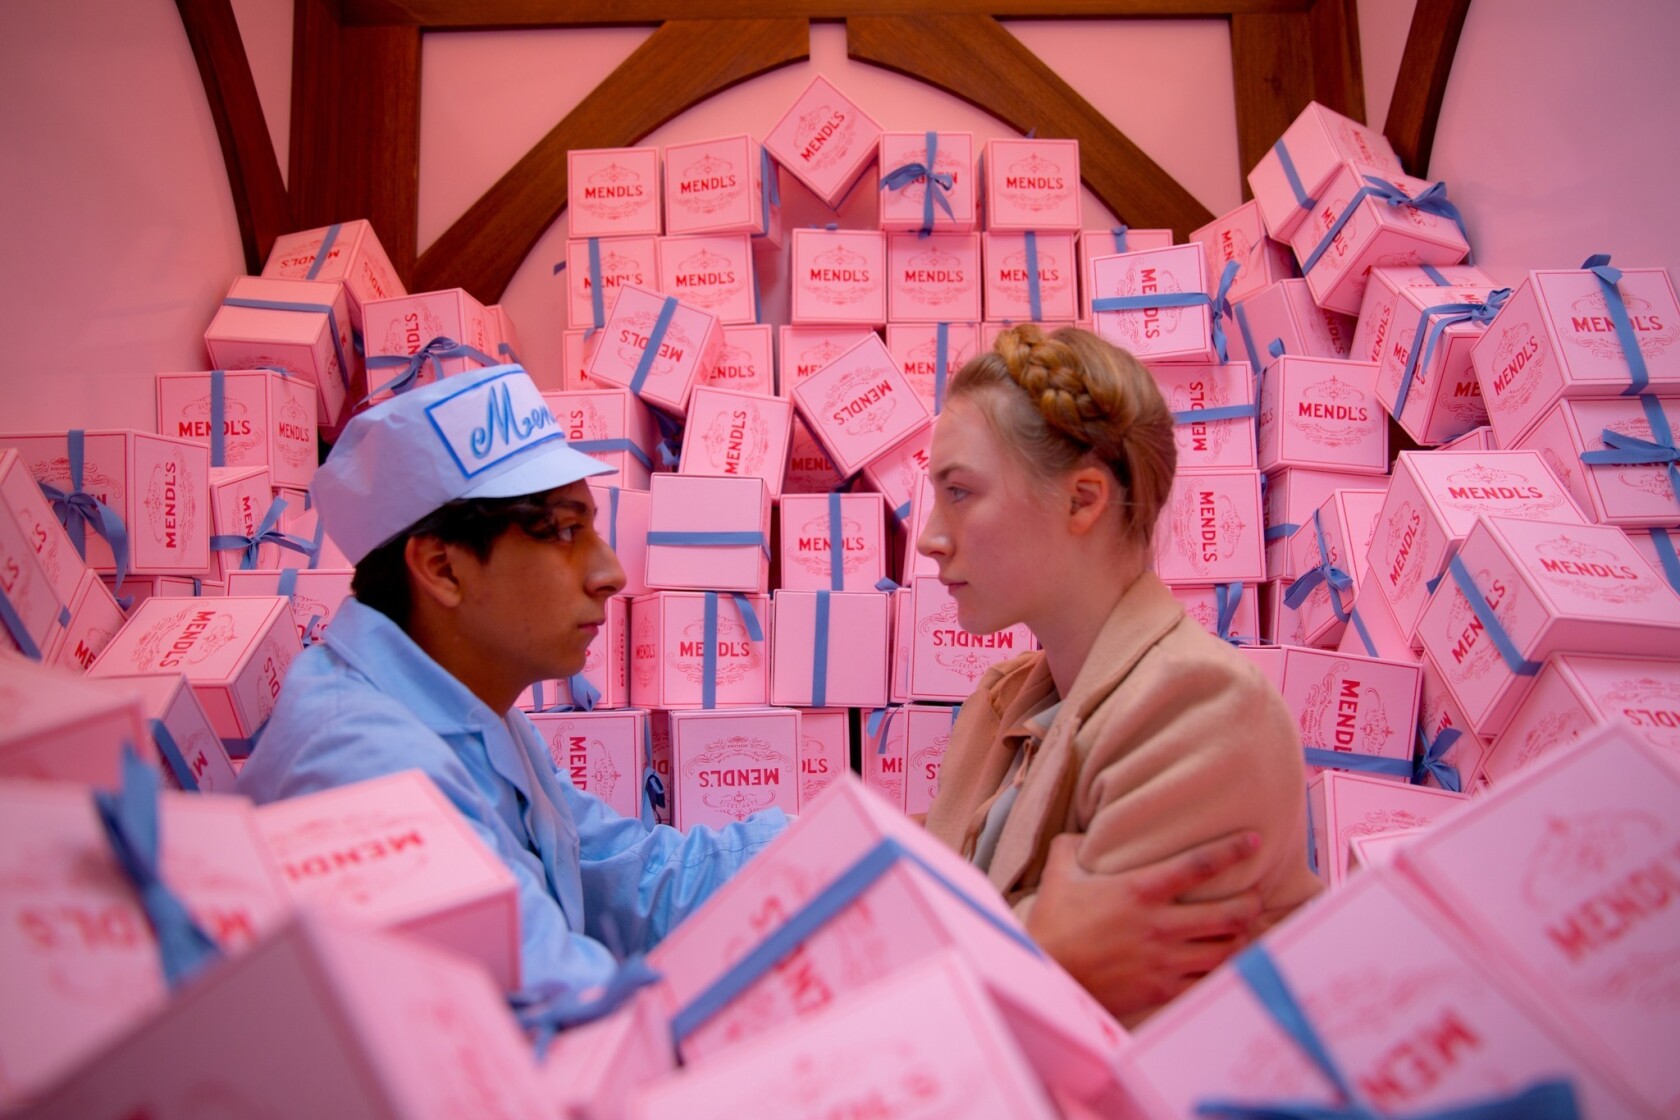 Image result for the grand budapest hotel